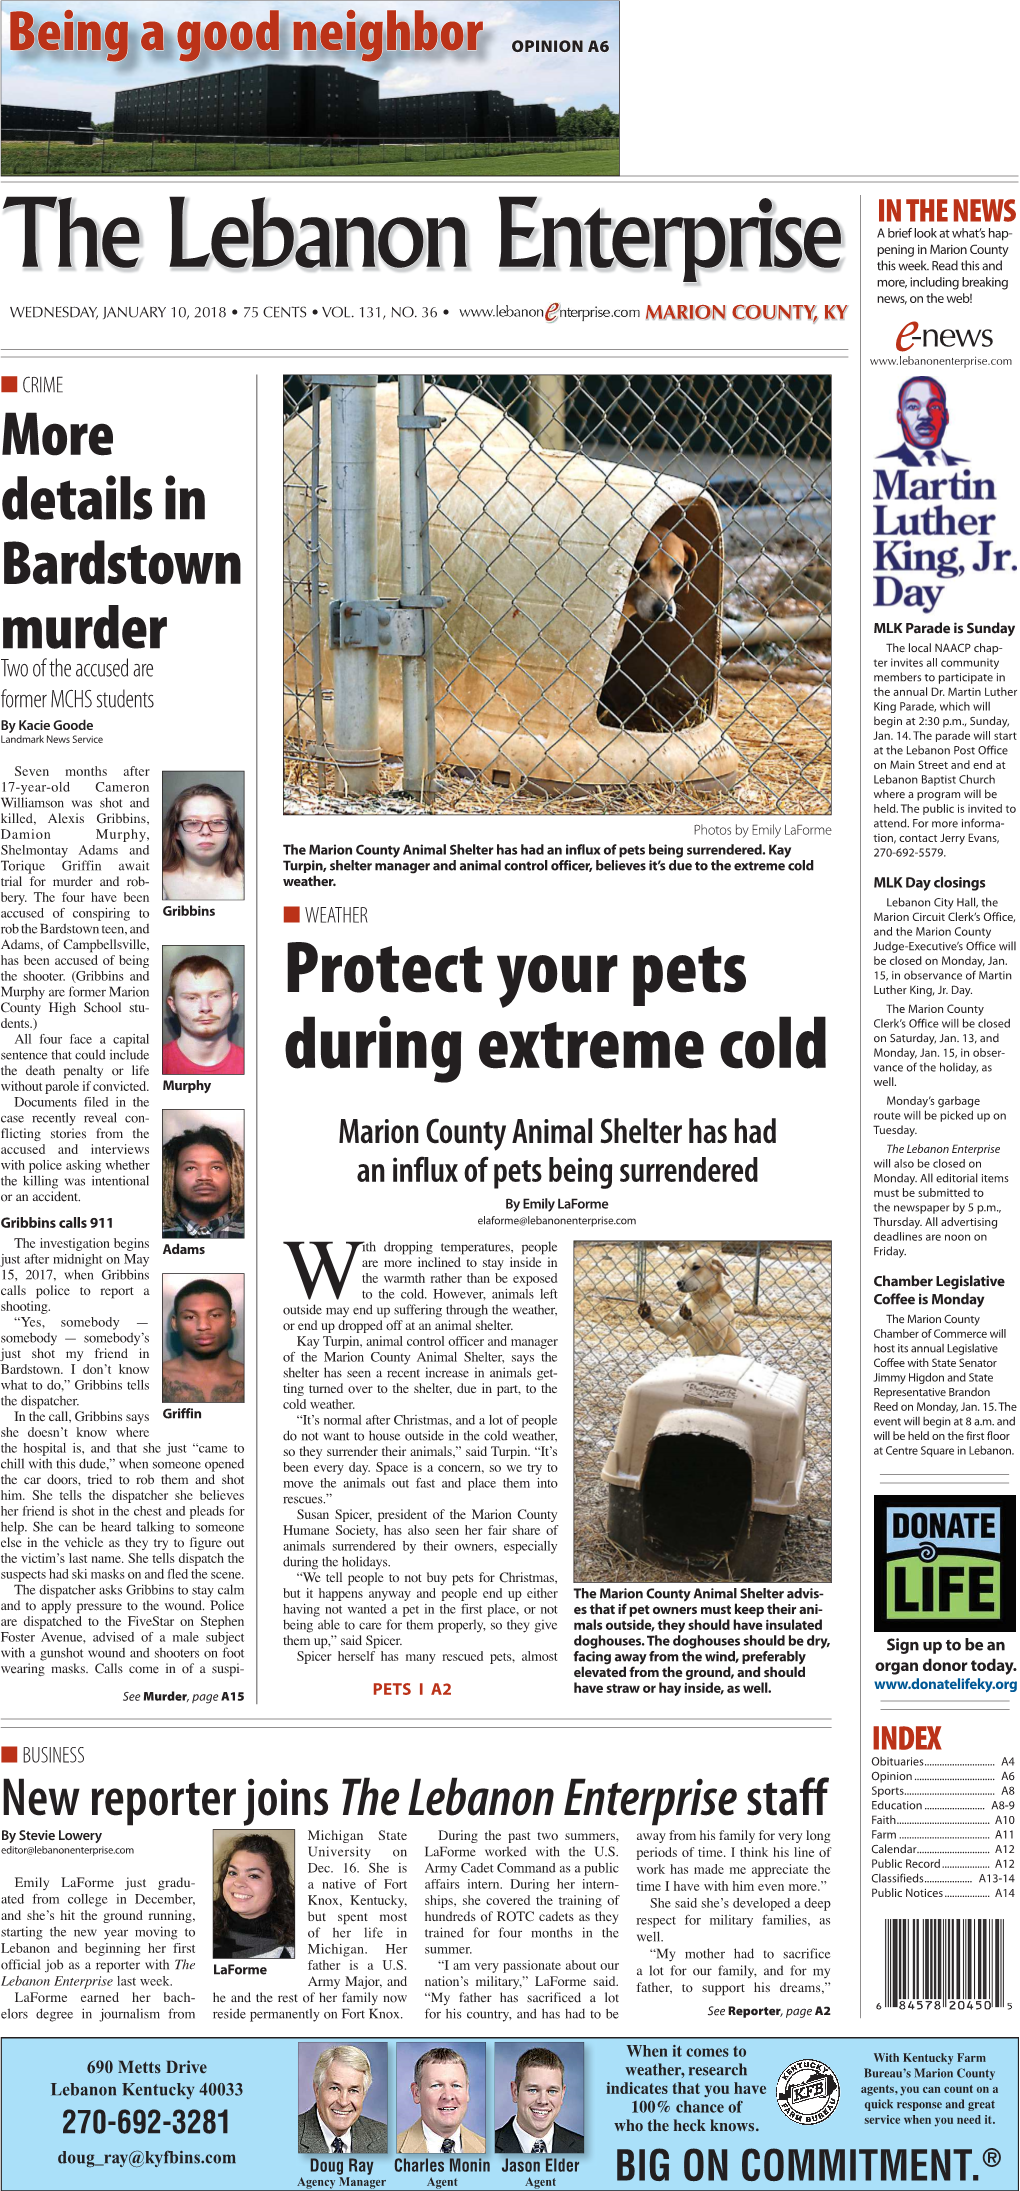 The Lebanon Enterprise with Police Asking Whether Will Also Be Closed on the Killing Was Intentional an Influx of Pets Being Surrendered Monday